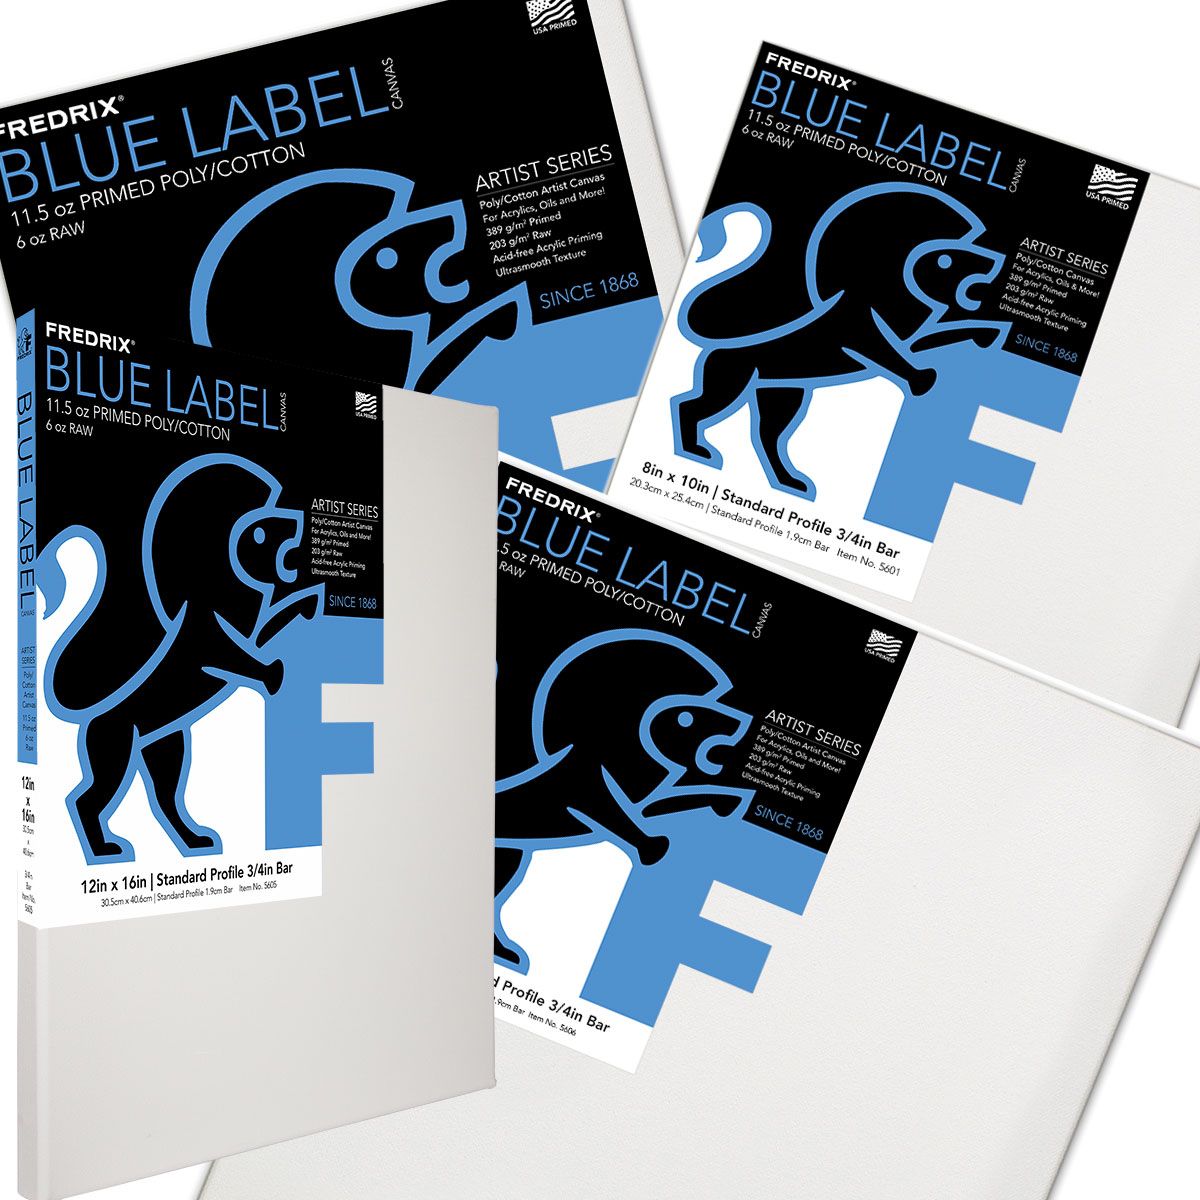 Fredrix Blue Label Canvas Ultrasmooth Poly/Cotton